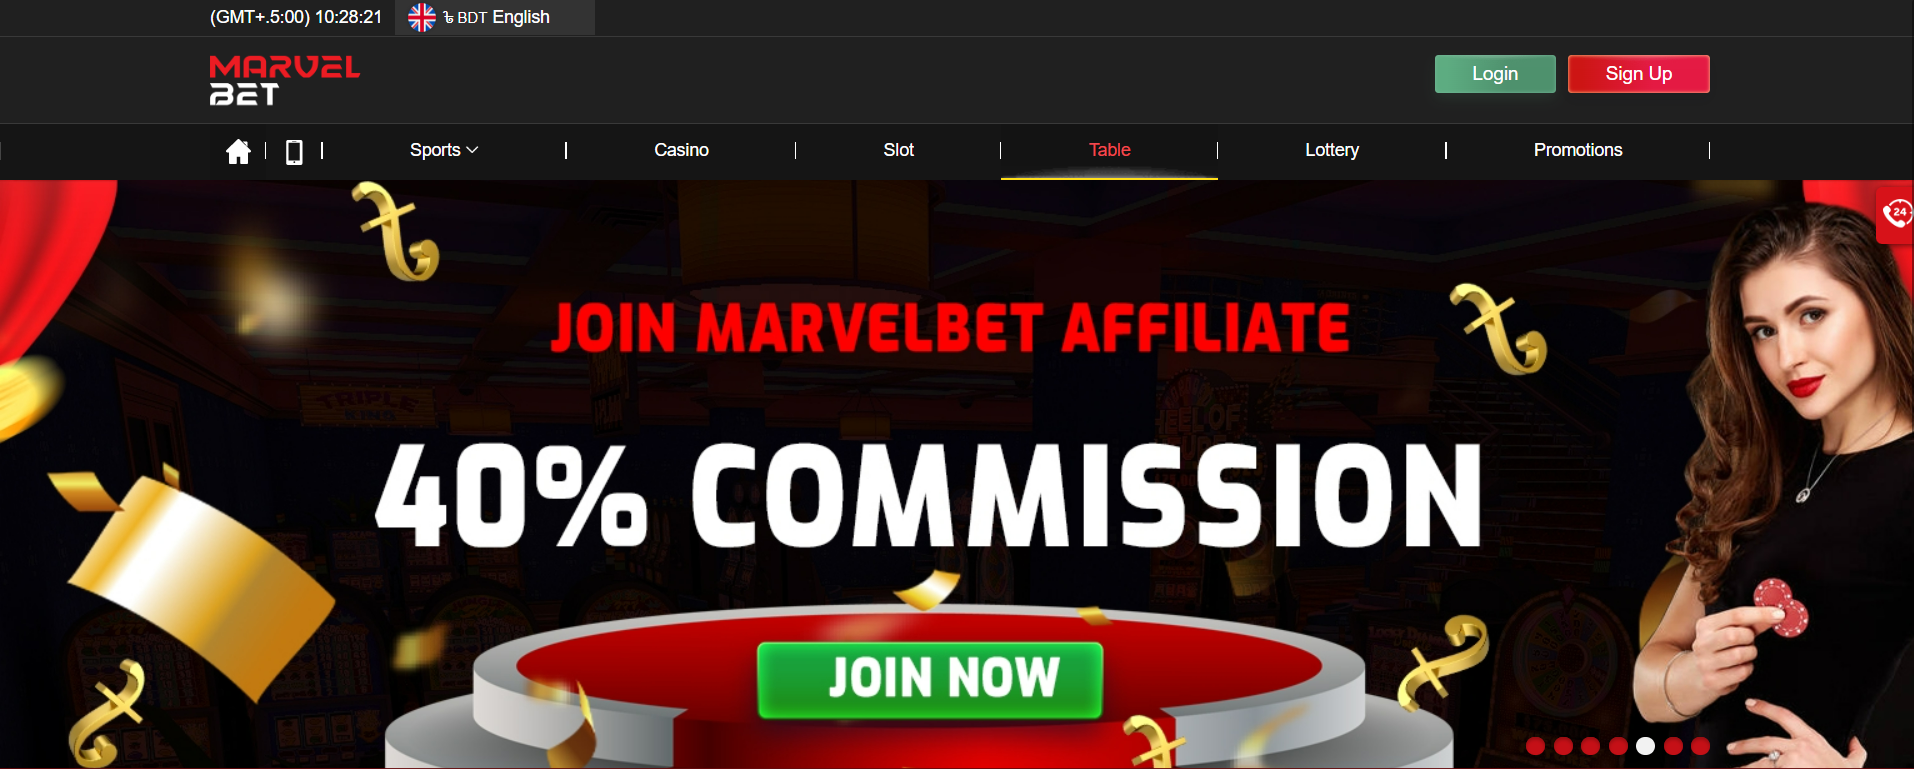 Visit the official website of Marvelbet